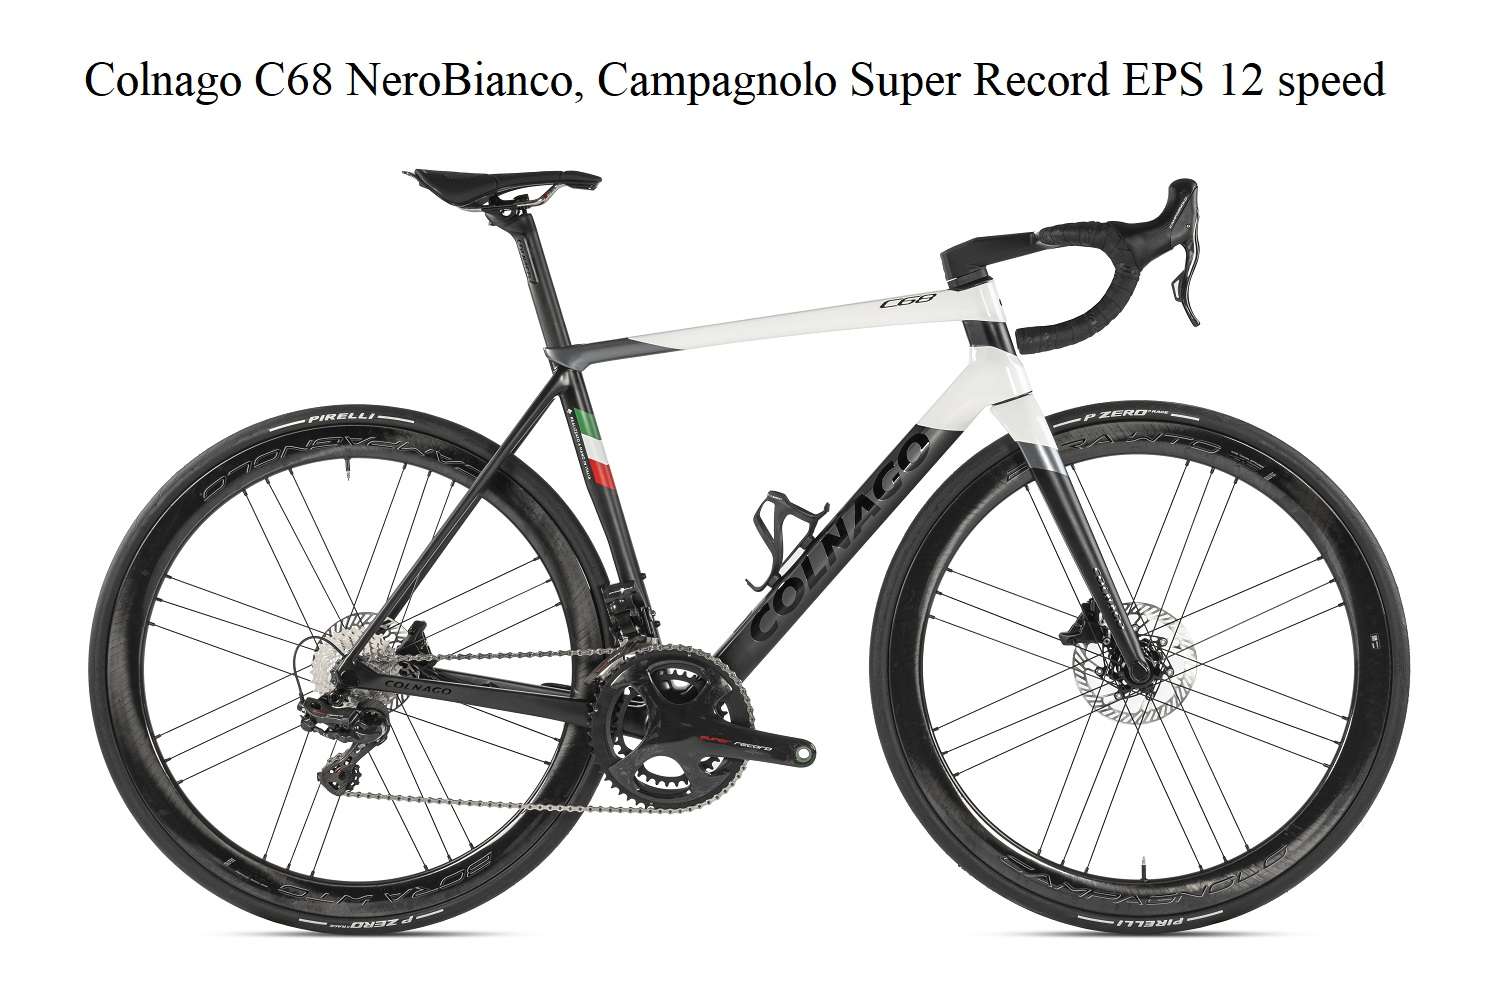 The new Colnago C68 in the HRWH color built with Campagnolo Super Record EPS disc and Bora WTO Ultra wheels